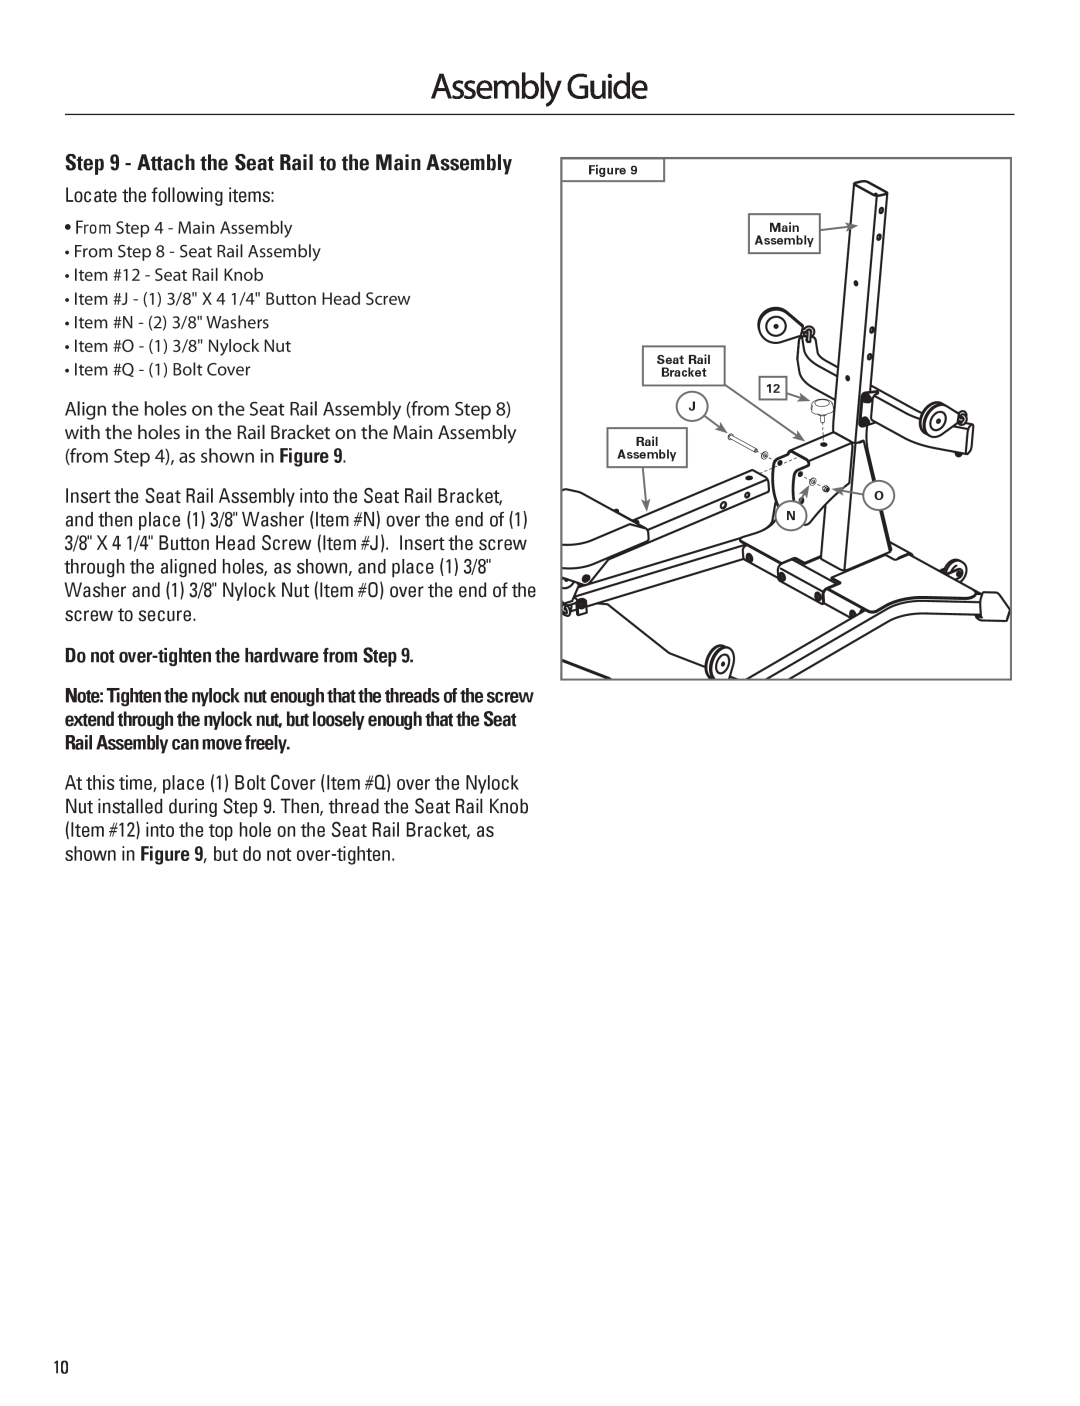 Bowflex 001-6961 Attach the Seat Rail to the Main Assembly, Assembly Guide, Do not over-tighten the hardware from Step 